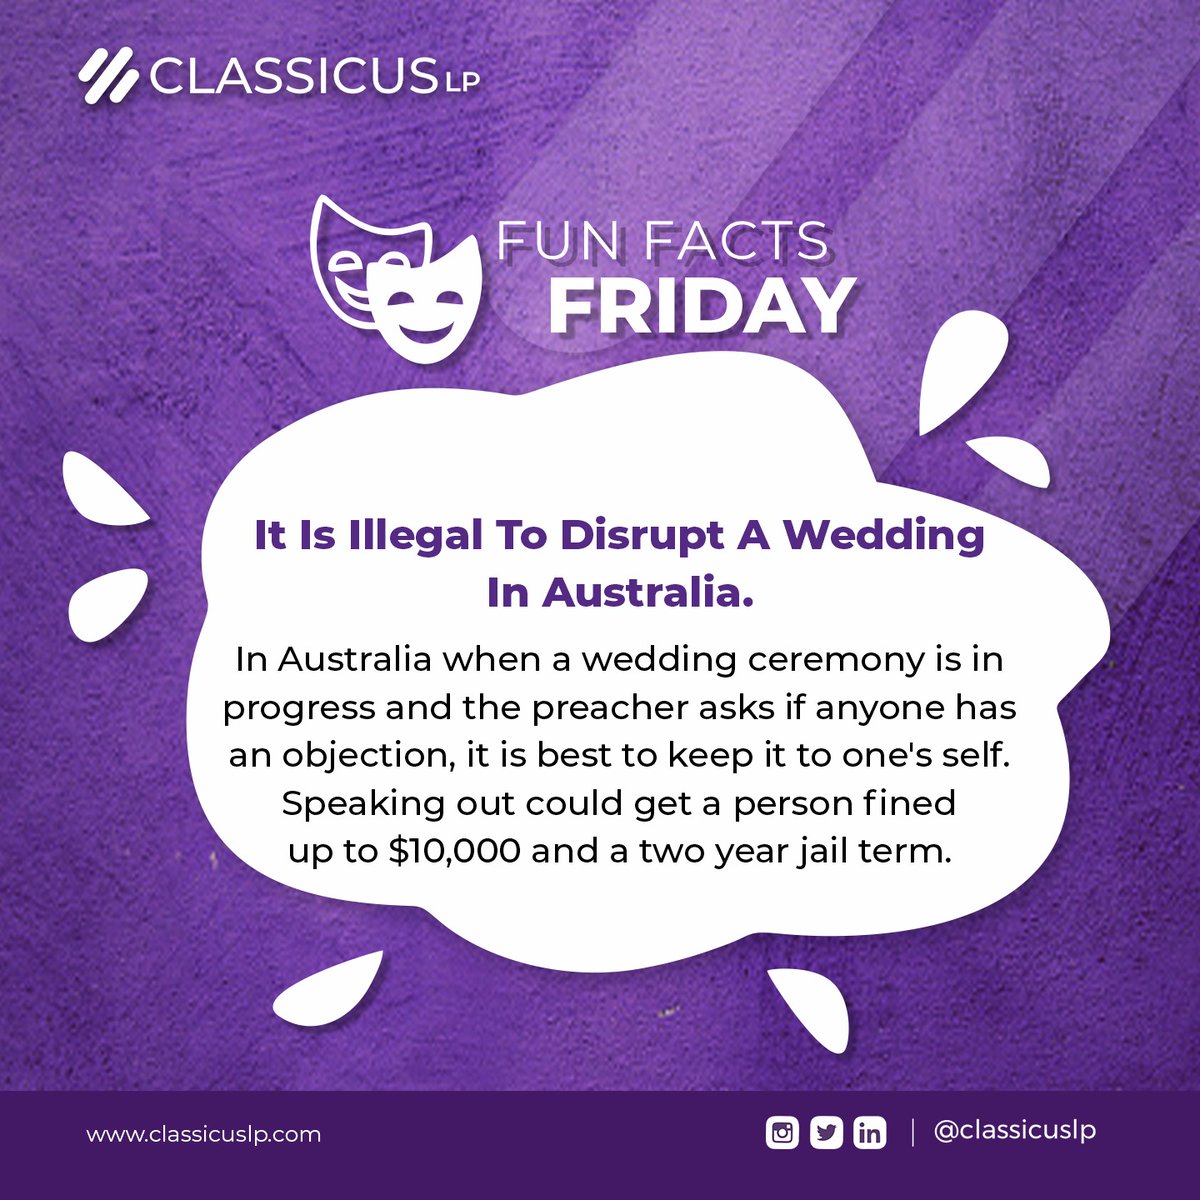 If you plan on attending a wedding in Australia, do well to take note of this fact in order to avoid being fined or jailed. #weirdrules #funfacts #weirdfriday #lawfirm #solicitor #lagosbusiness #lagoslawfirm #weekend